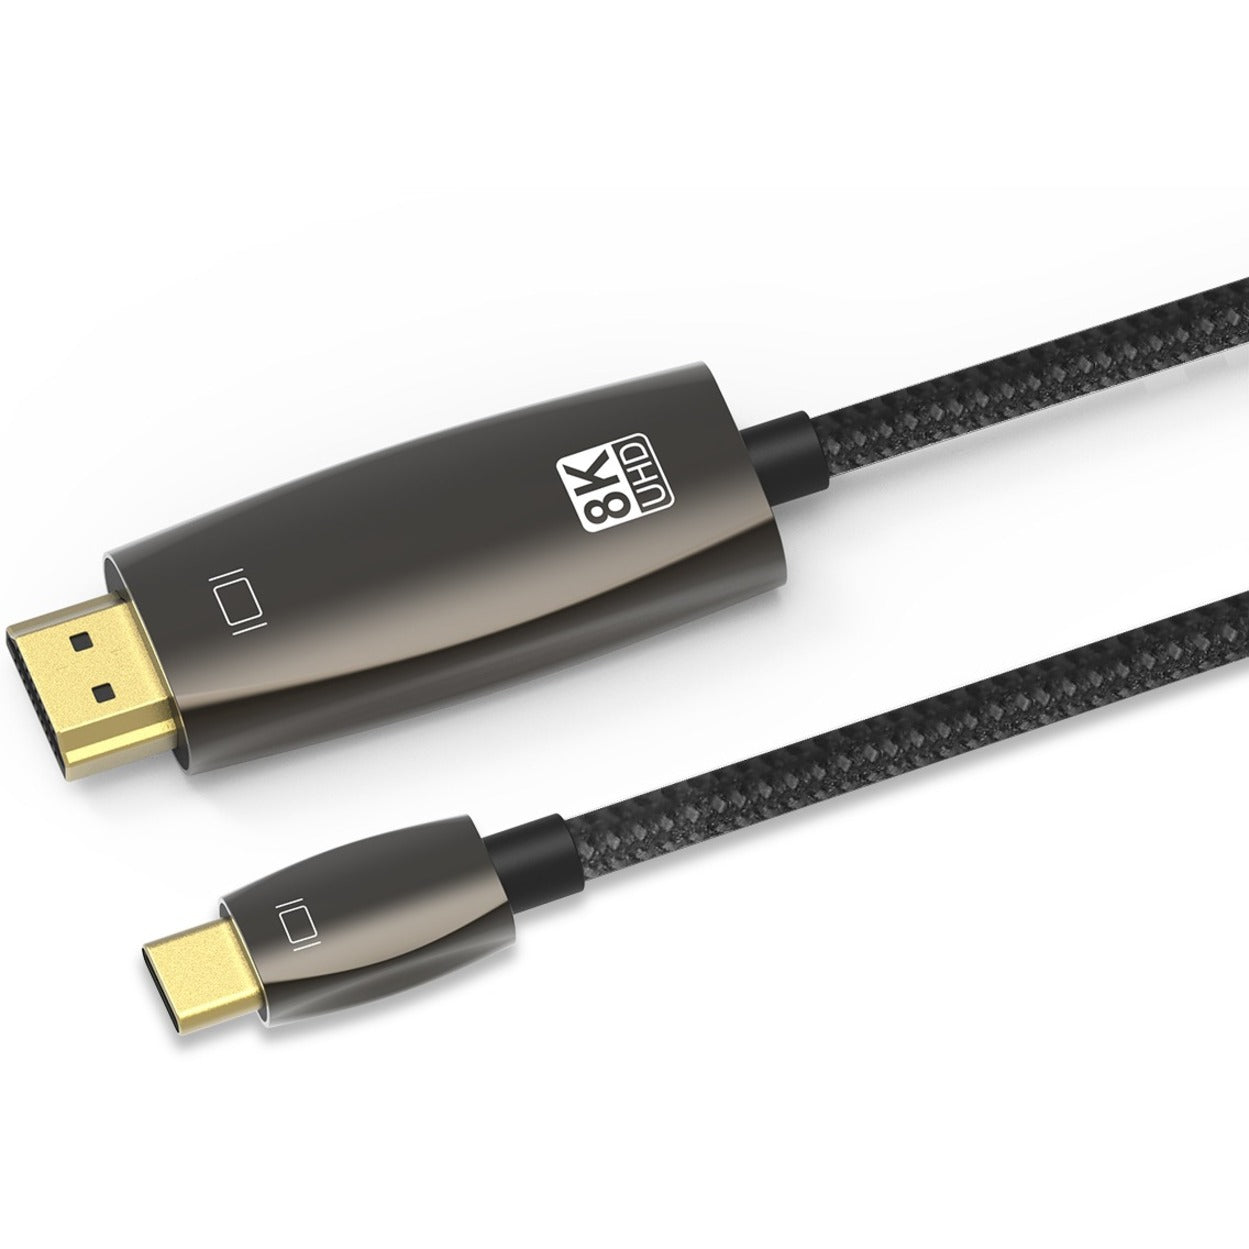 4XEM 4XTPC023B1M 8K/4K 1M USB-C to HDMI Cable, Plug & Play, 32.4 Gbit/s Data Transfer Rate, 7680 x 4320 Supported Resolution